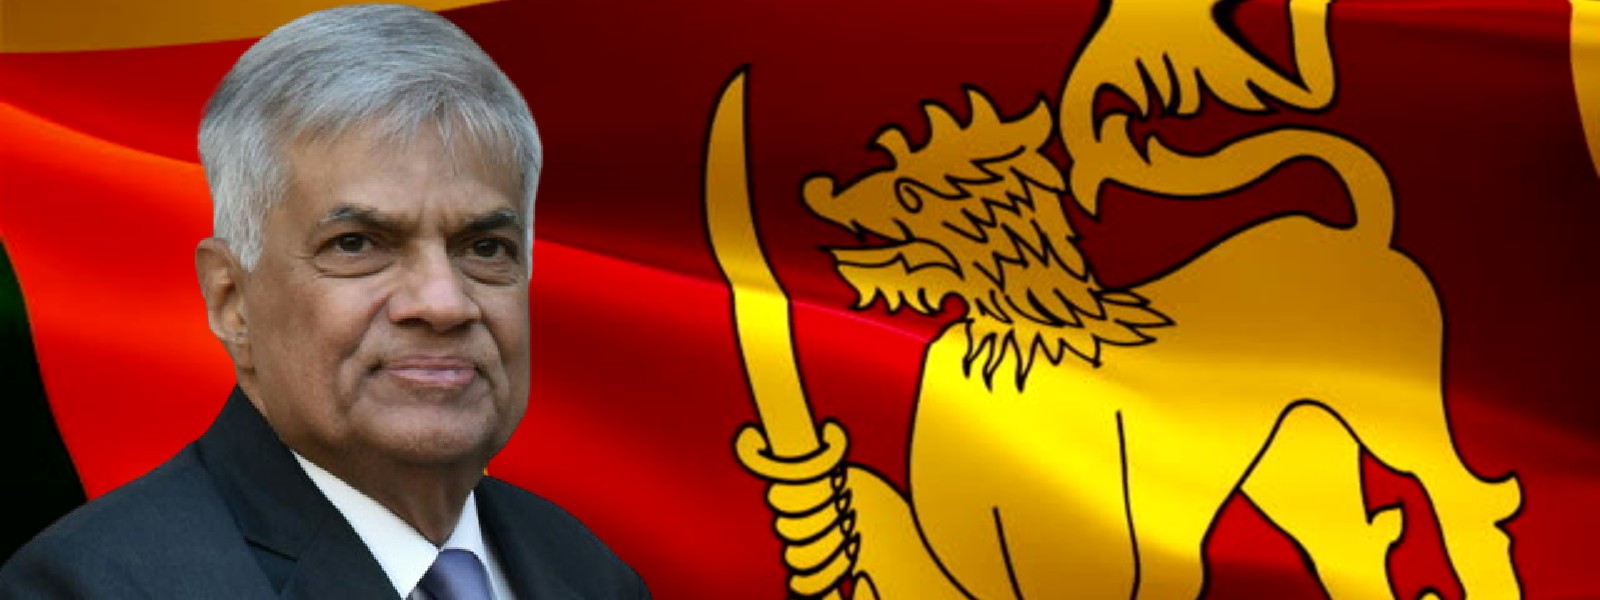 Sri Lanka gets a new President: Ranil Wickremesinghe wins with 134 votes